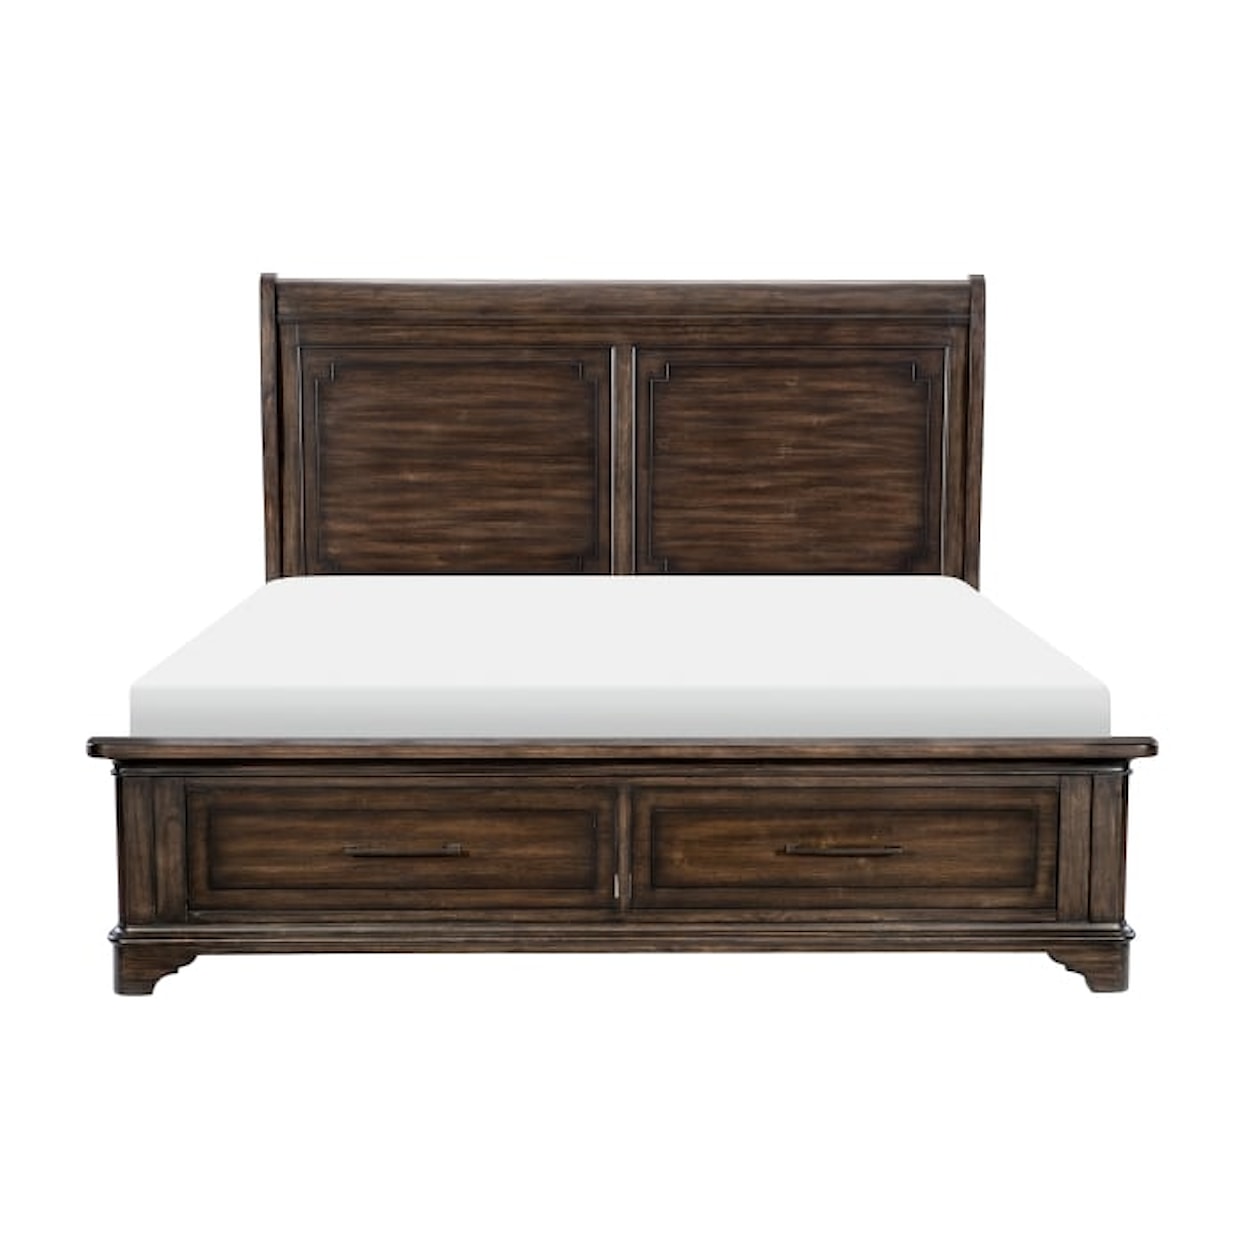 Homelegance Furniture Boone Queen Bed